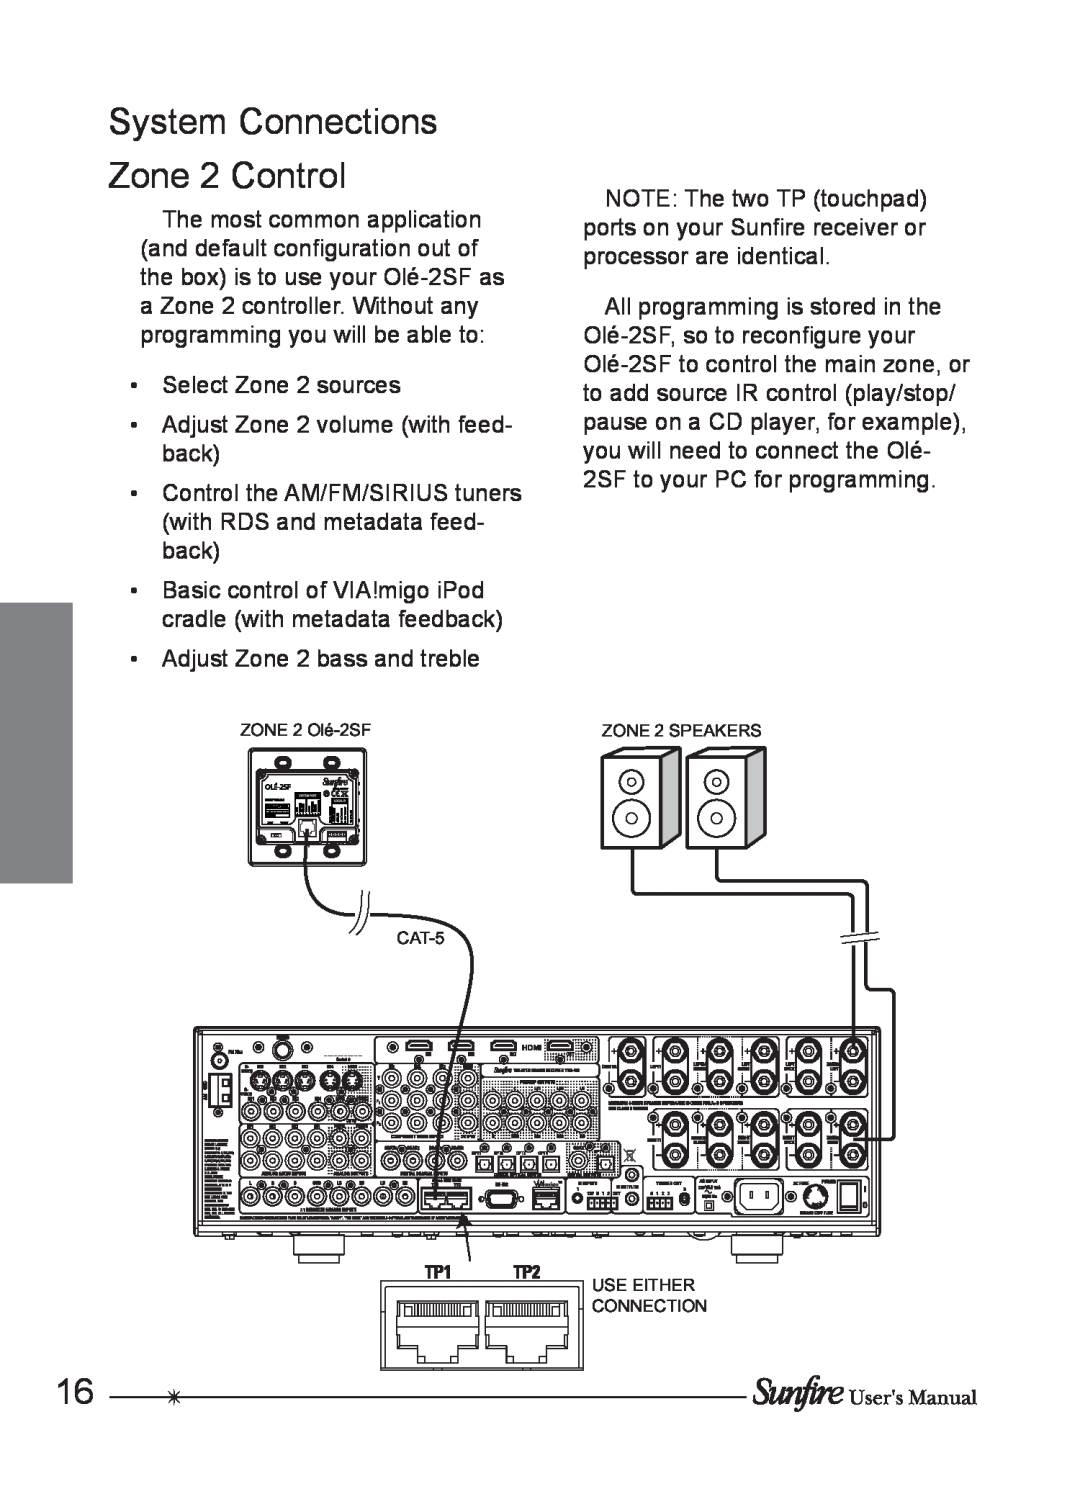 Sunfire OLE-2SF manual System Connections Zone 2 Control 